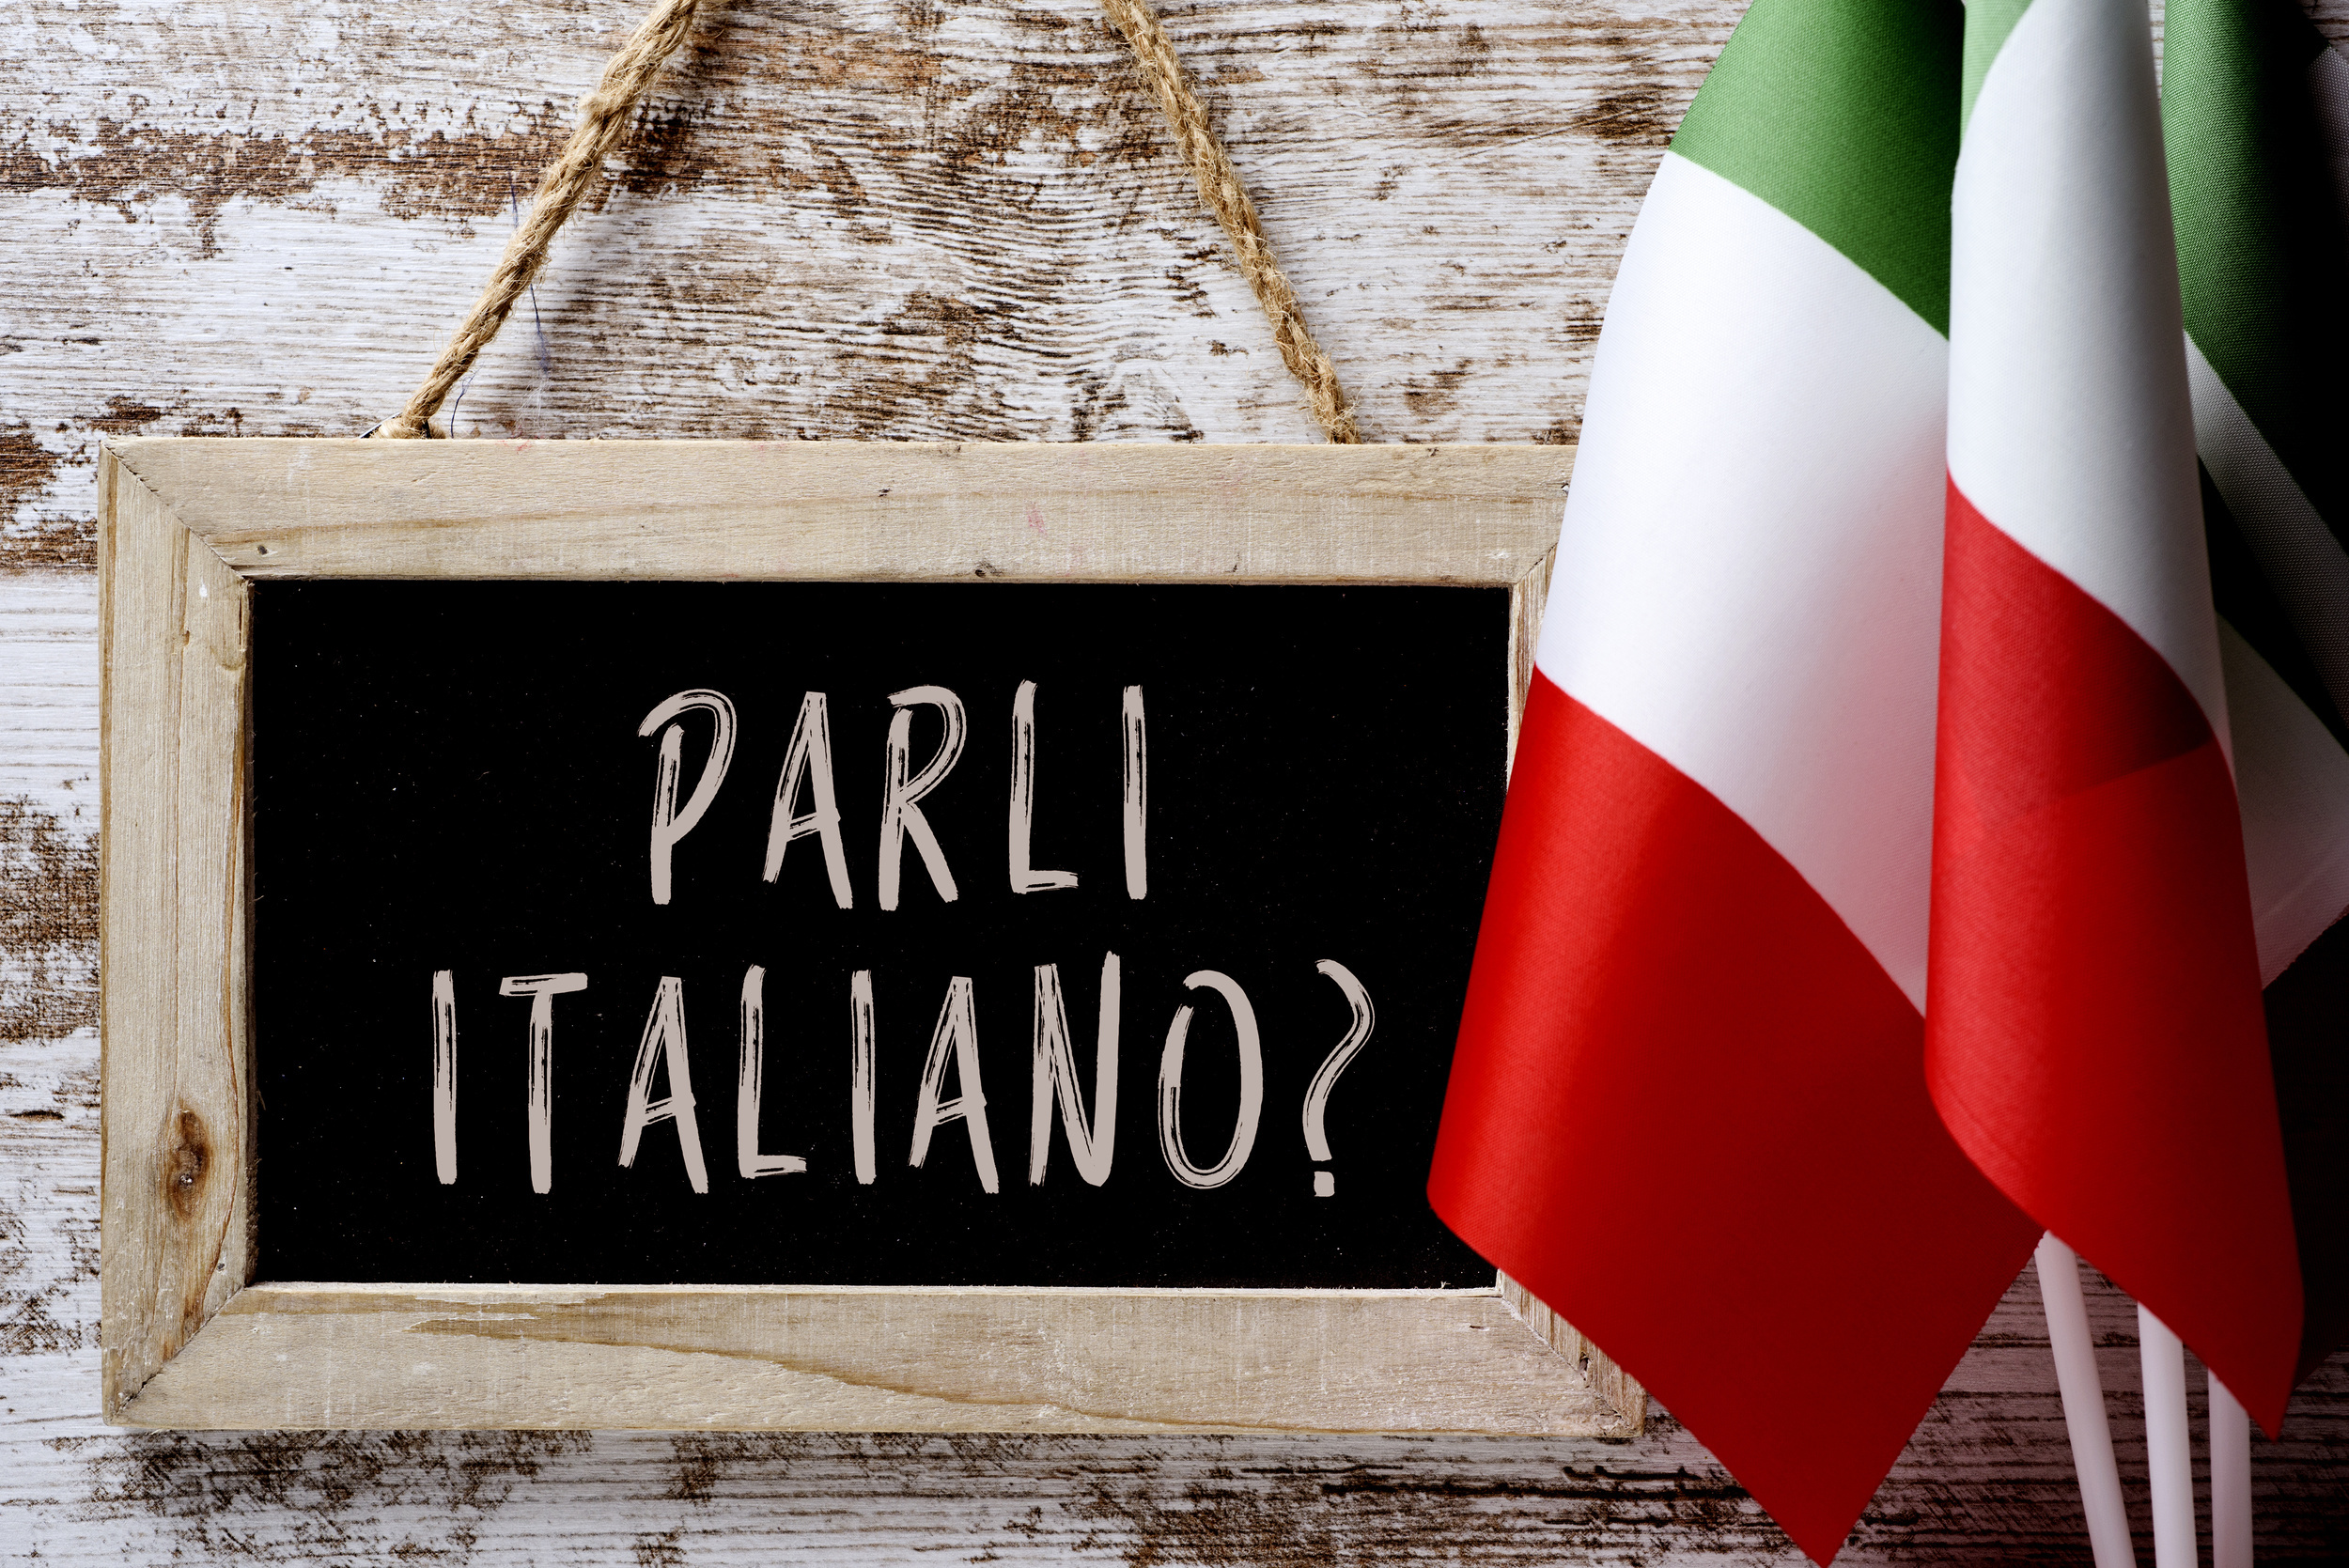 <p>Although English is a Germanic language and Italian a romance language, English pulls many words from Romance languages, so it’s easy to pick up on languages, such as Italian, within that category. Italian words are also fairly easy for English speakers to pronounce upon first look. </p><p><a href='https://www.msn.com/en-us/community/channel/vid-cj9pqbr0vn9in2b6ddcd8sfgpfq6x6utp44fssrv6mc2gtybw0us'>Follow us on MSN to see more of our exclusive lifestyle content.</a></p>